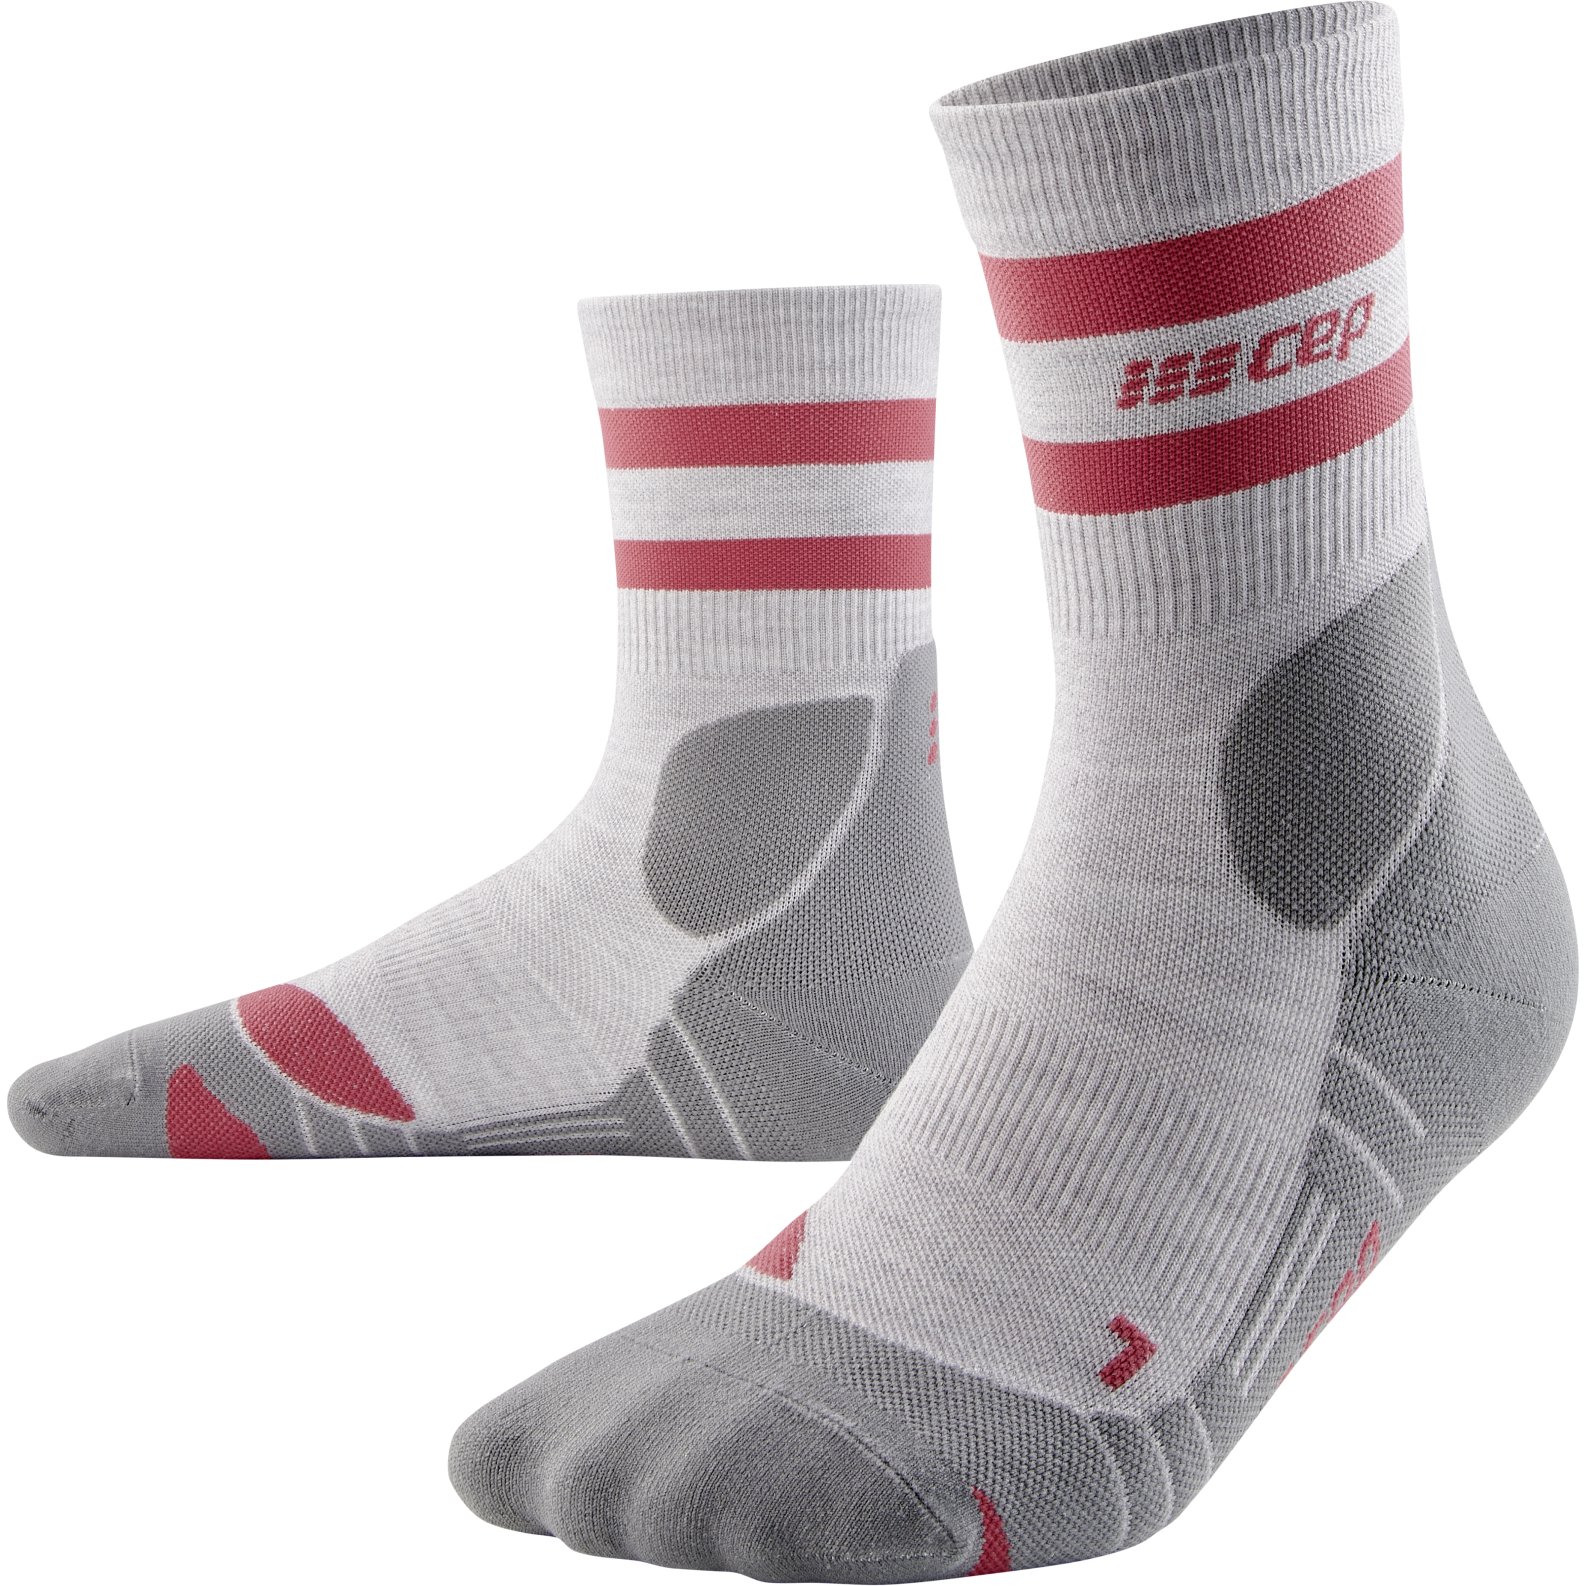 Picture of CEP Hiking 80s Mid Cut Compression Socks Women - light grey/red